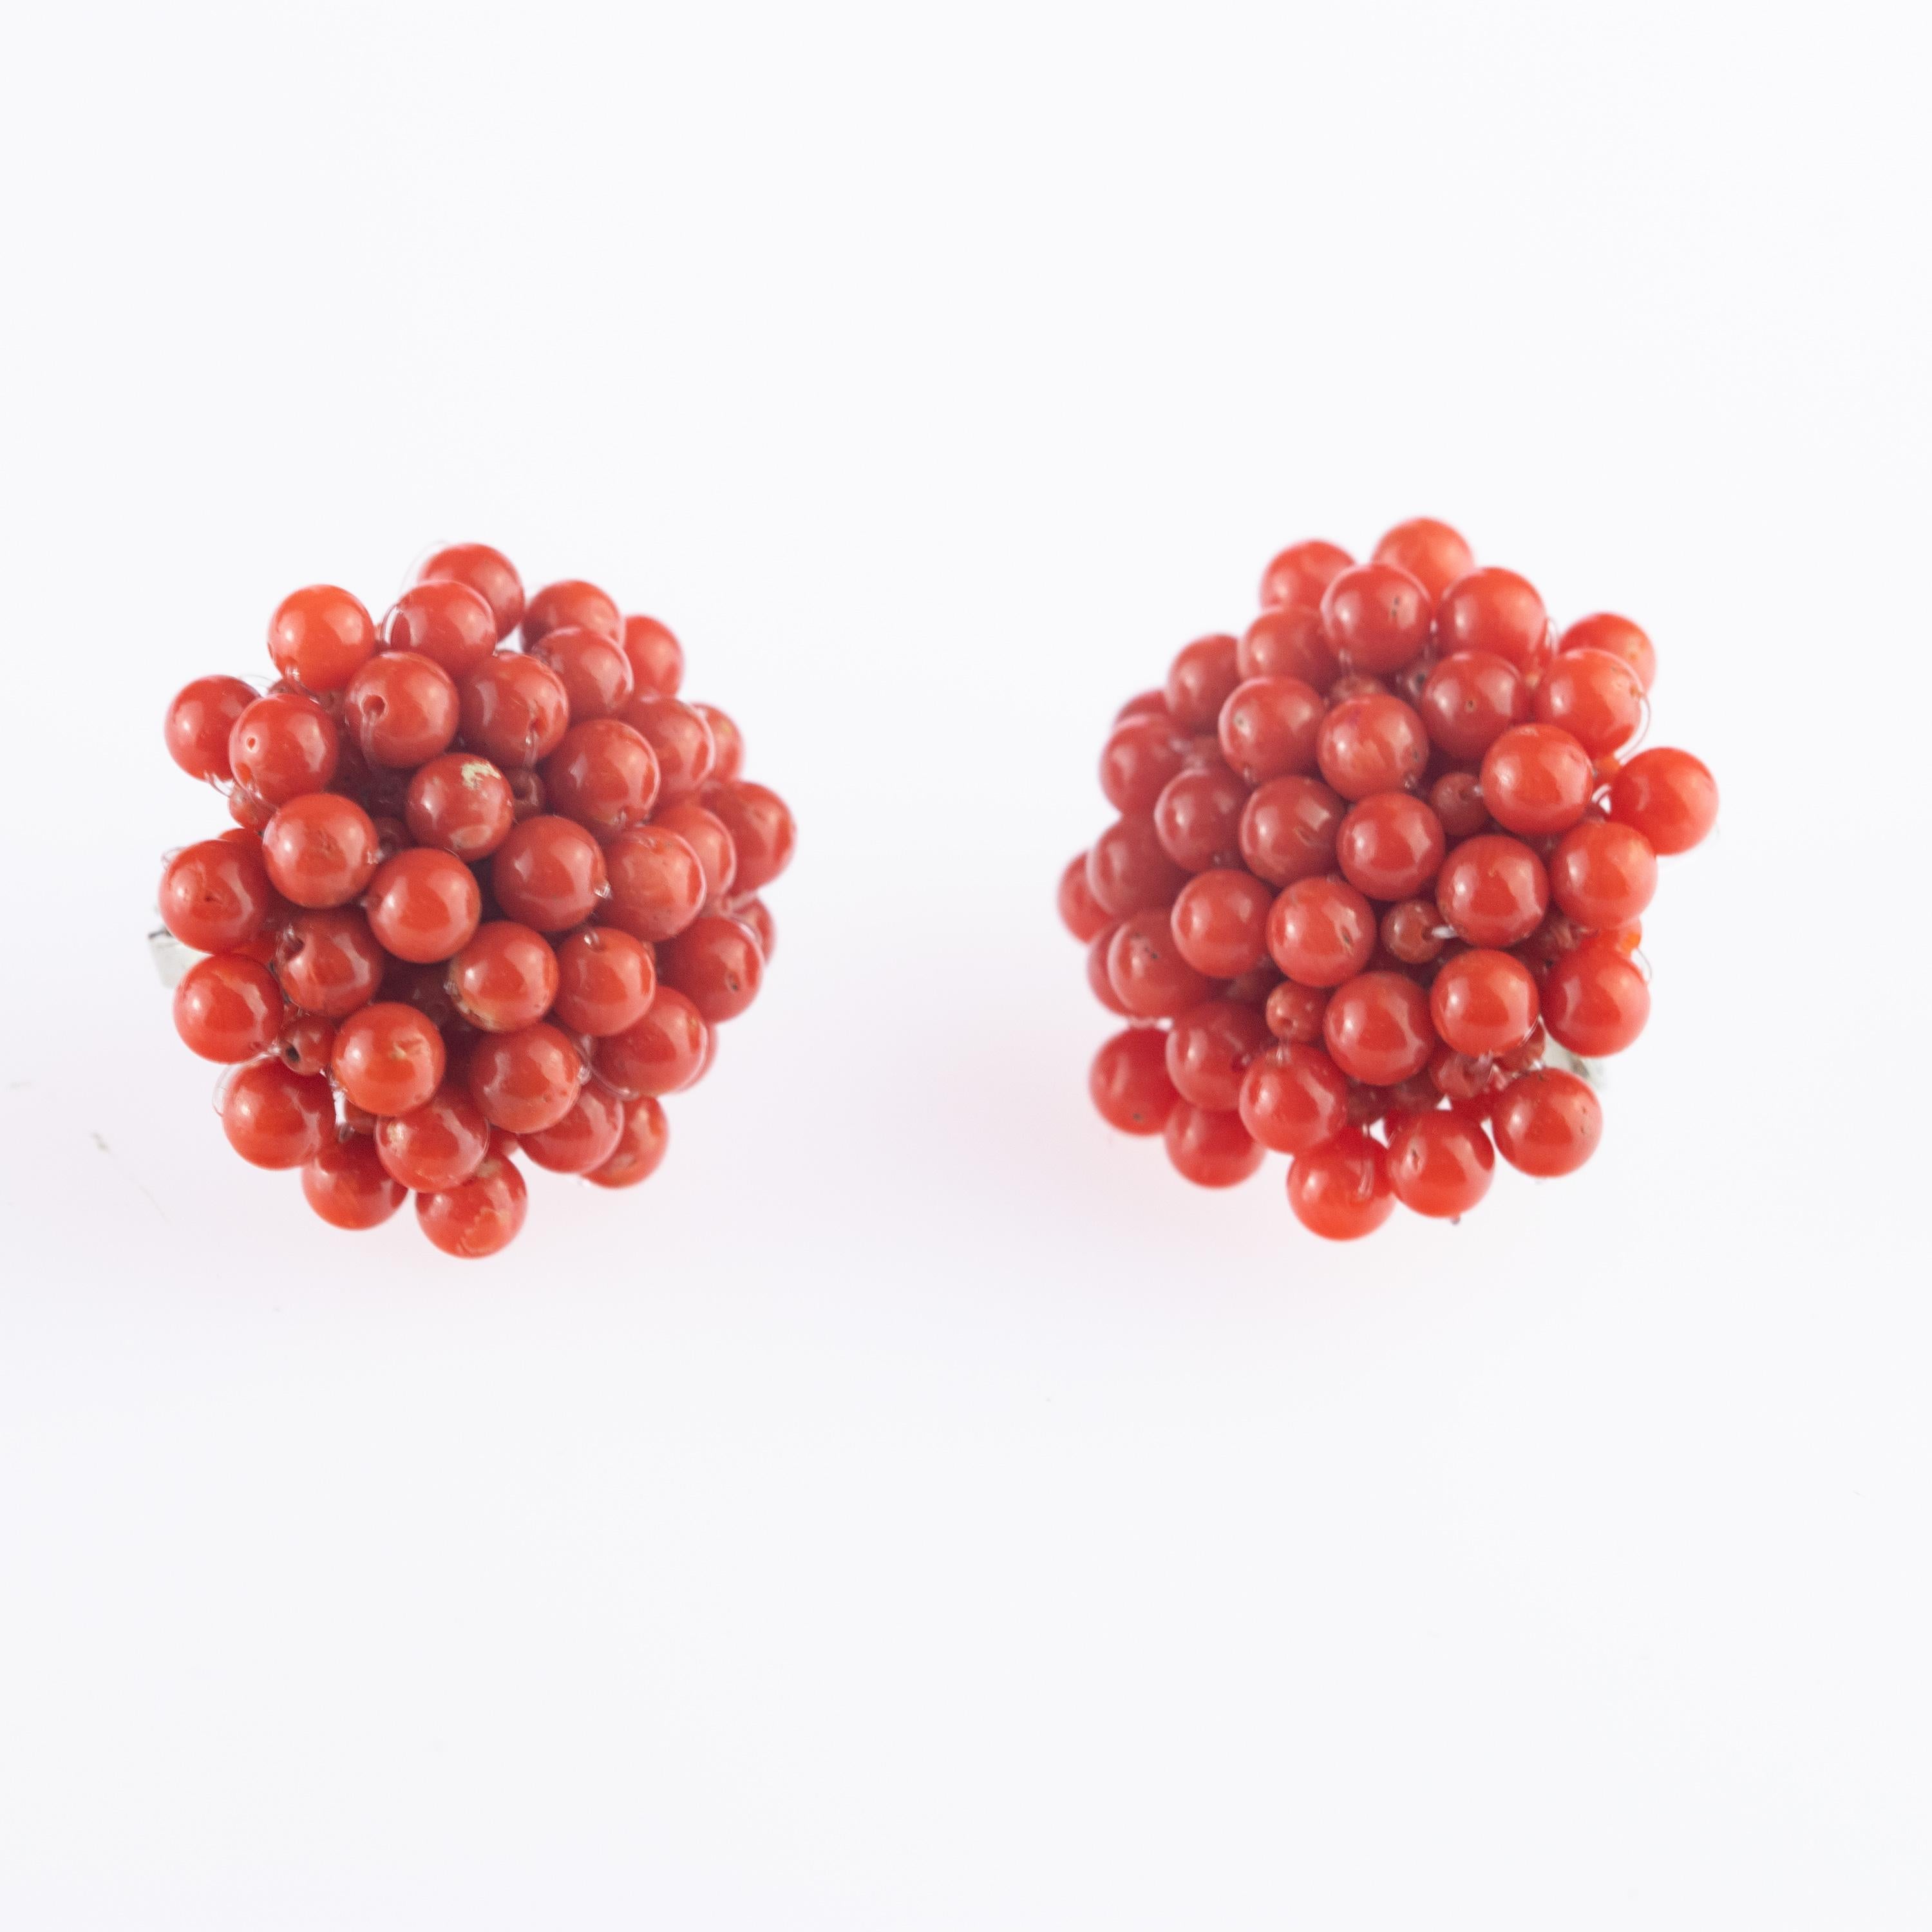 Marvelous and splendid design of mediterranean red coral flowers that evoke the magic and delicacy of Italian designs. The simplicity of the piece that creates a unique and unrepeatable cocktail jewel. Clip on earrings with stunning natural coral